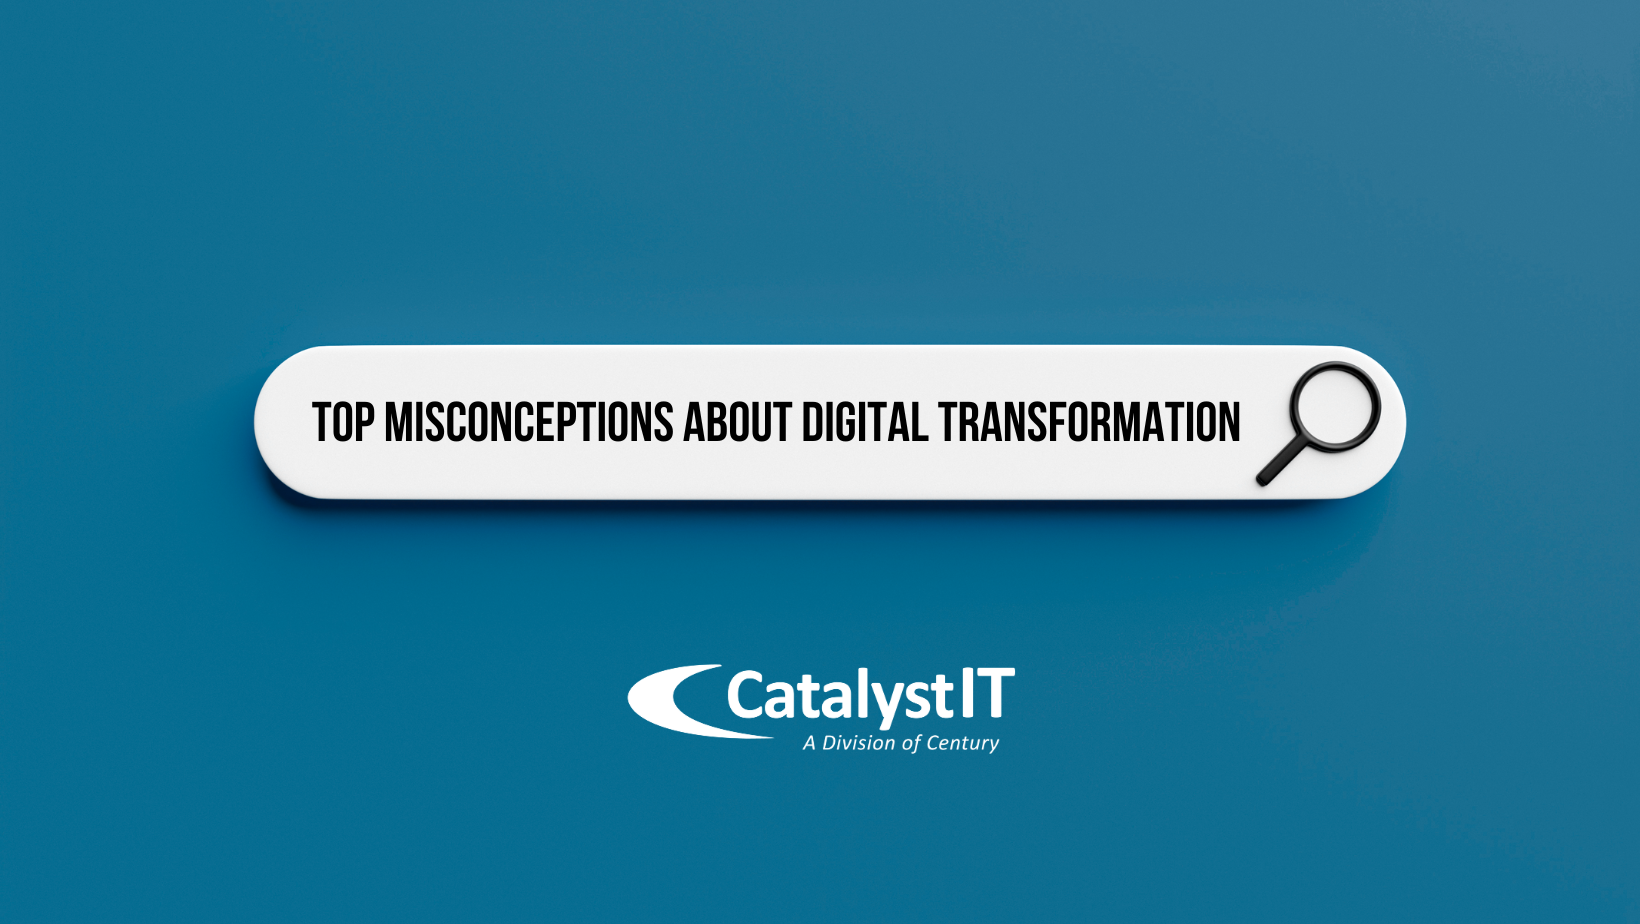 Top Misconceptions About Digital Transformation